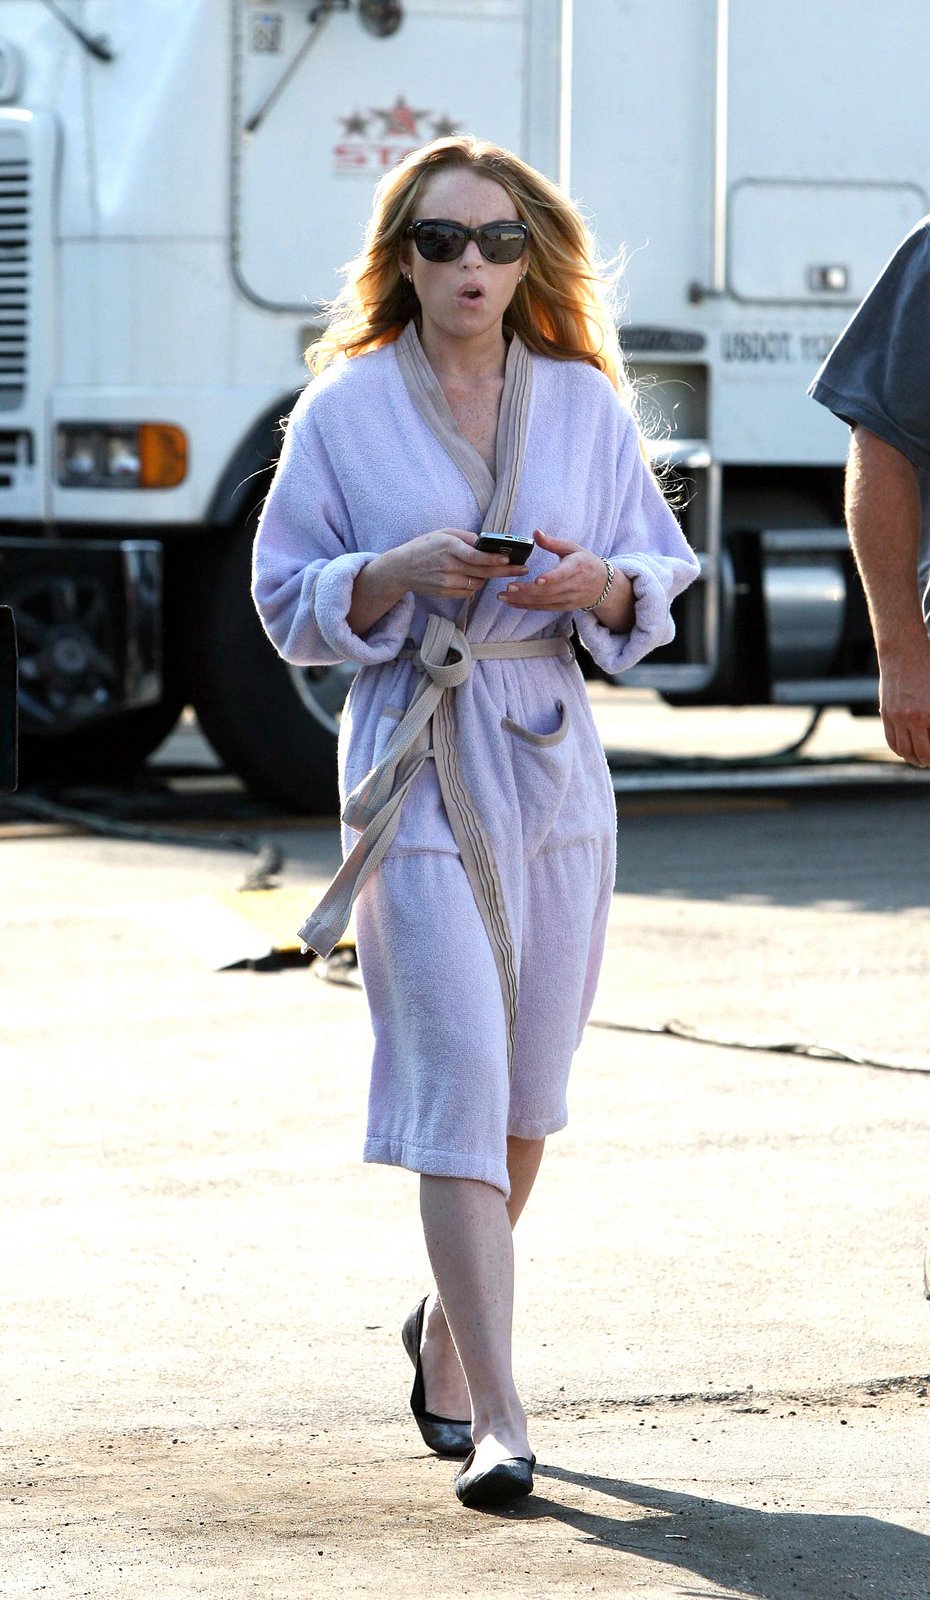 [77549_tlfan_Lindsay_Lohan_performs_her_final_scenes_on_the_set_of_Labor_Pains_7.16.08_43_122_1095lo.jpg]